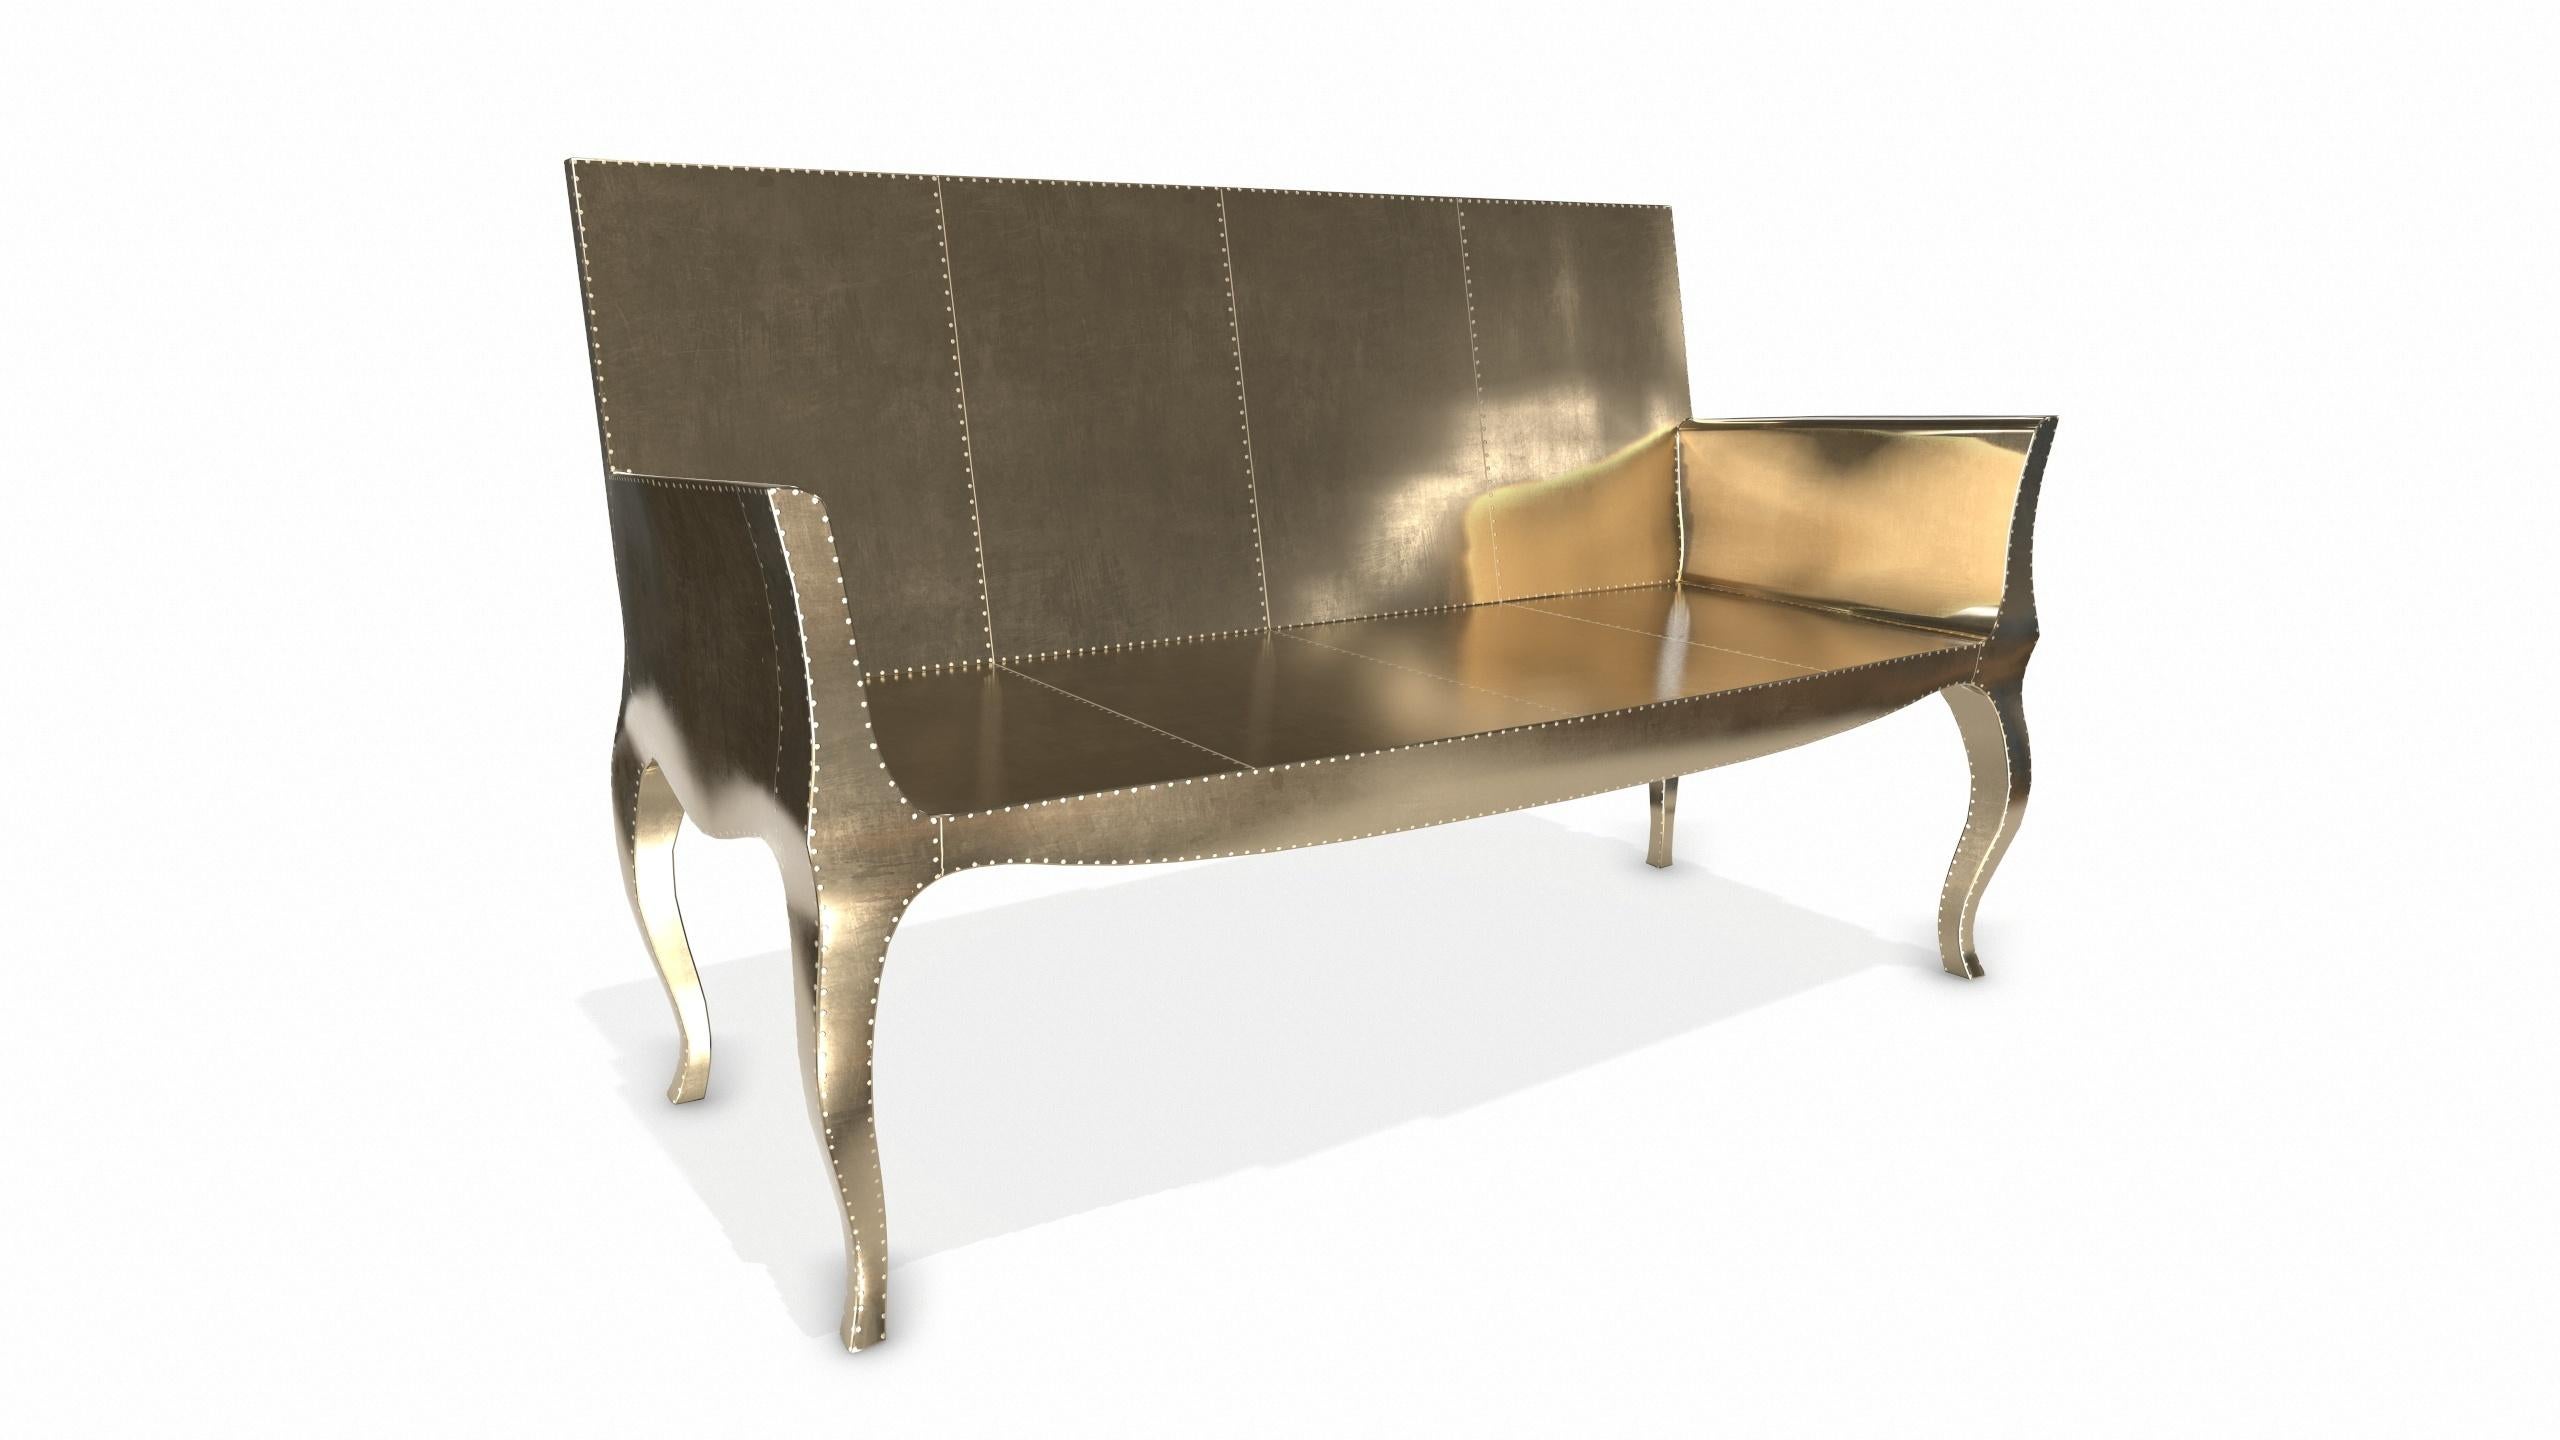 Contemporary Louise Settee Art Deco Lounge Chairs in Smooth Brass by Paul Mathieu For Sale